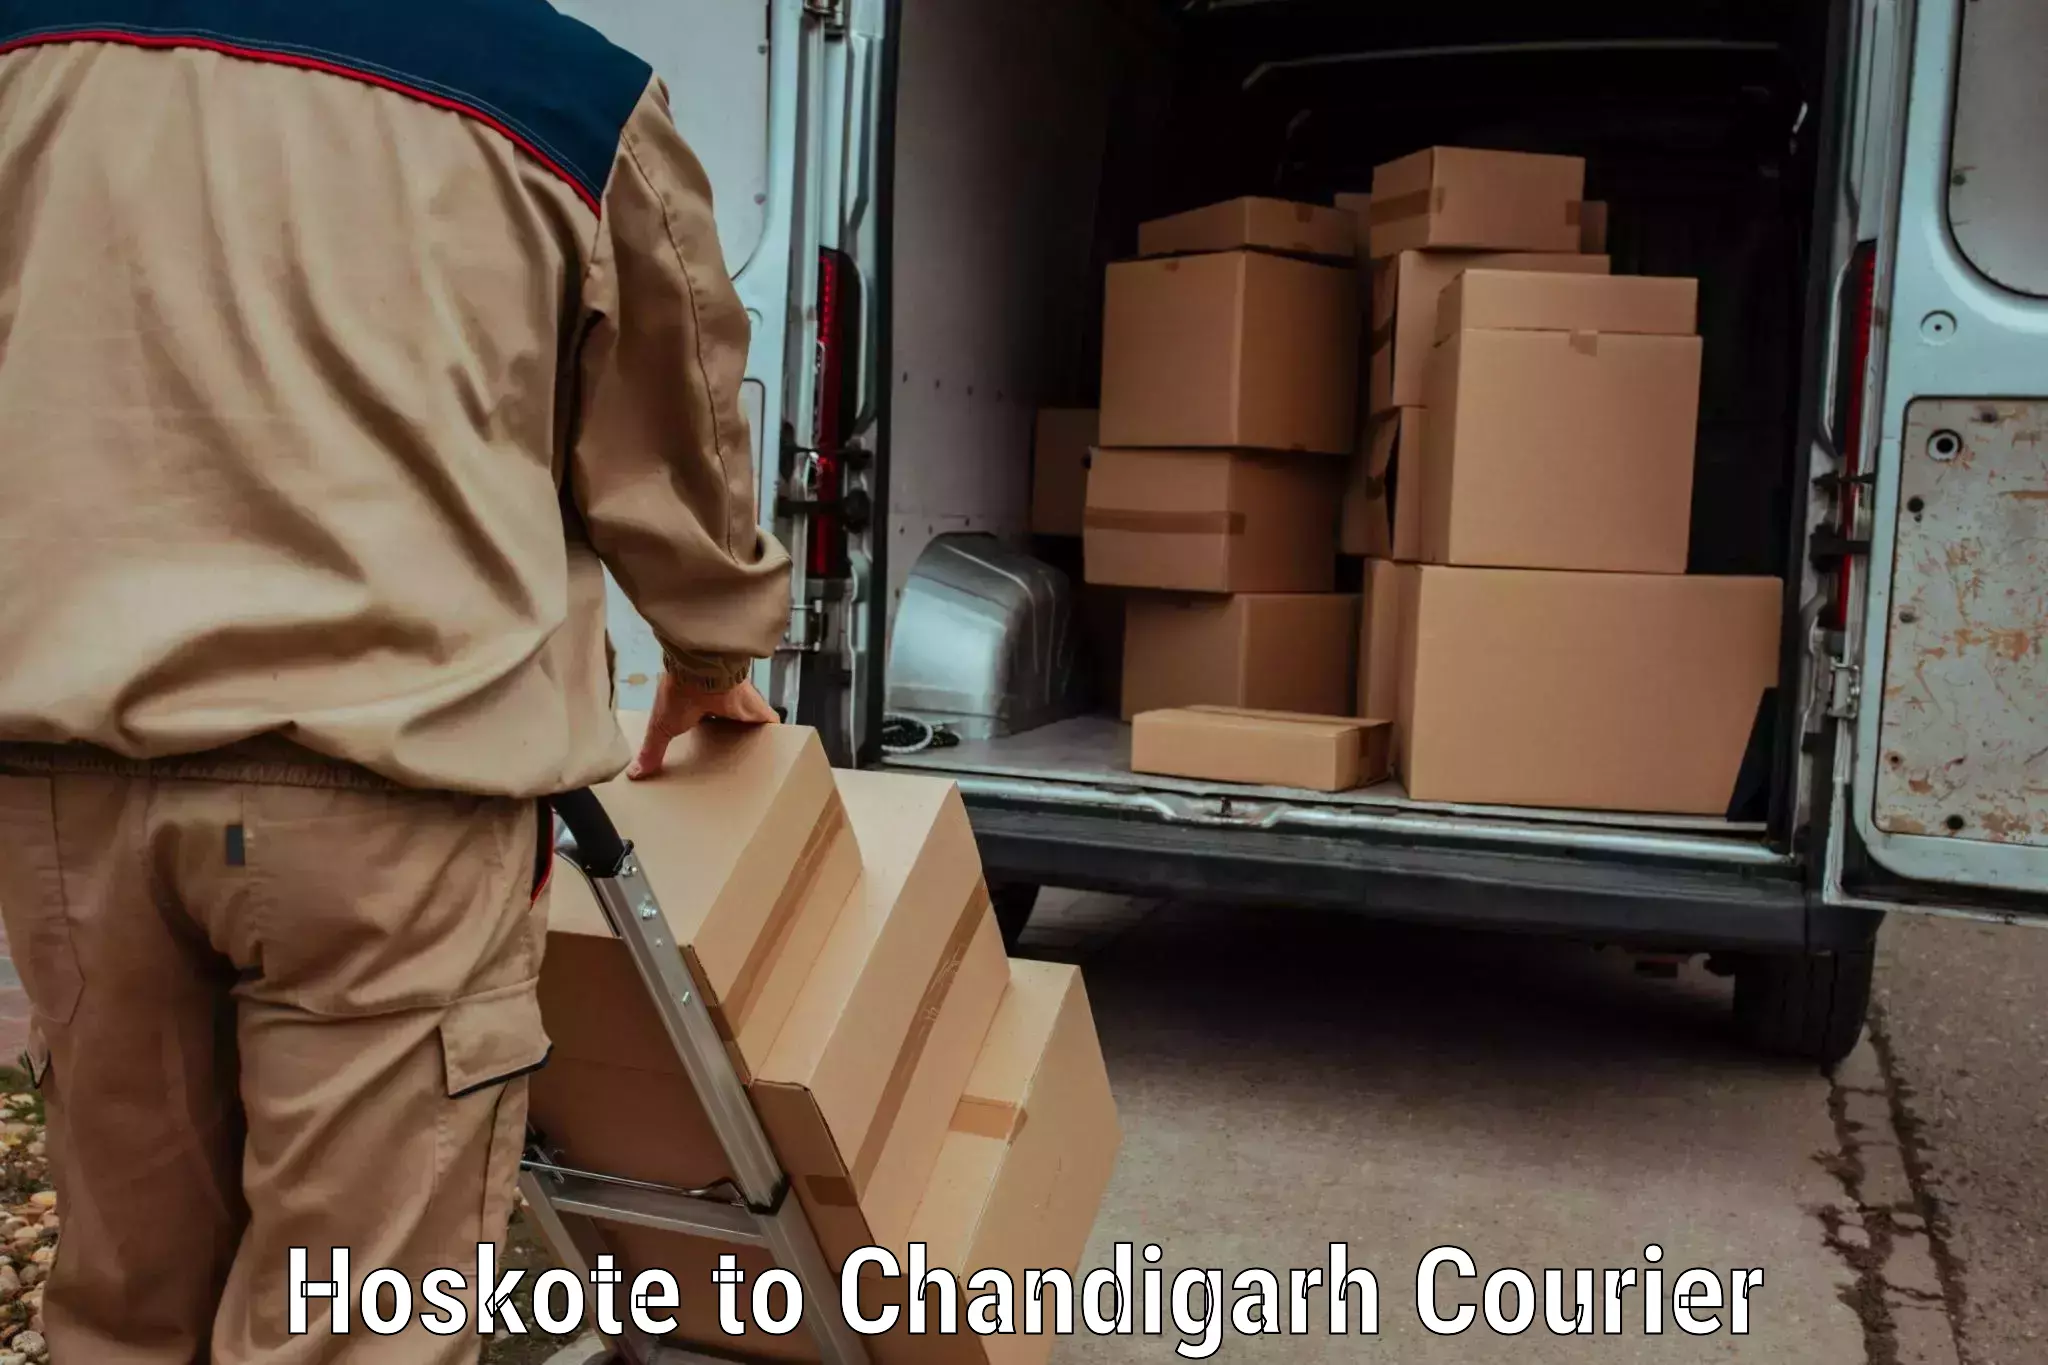 Reliable delivery network Hoskote to Chandigarh